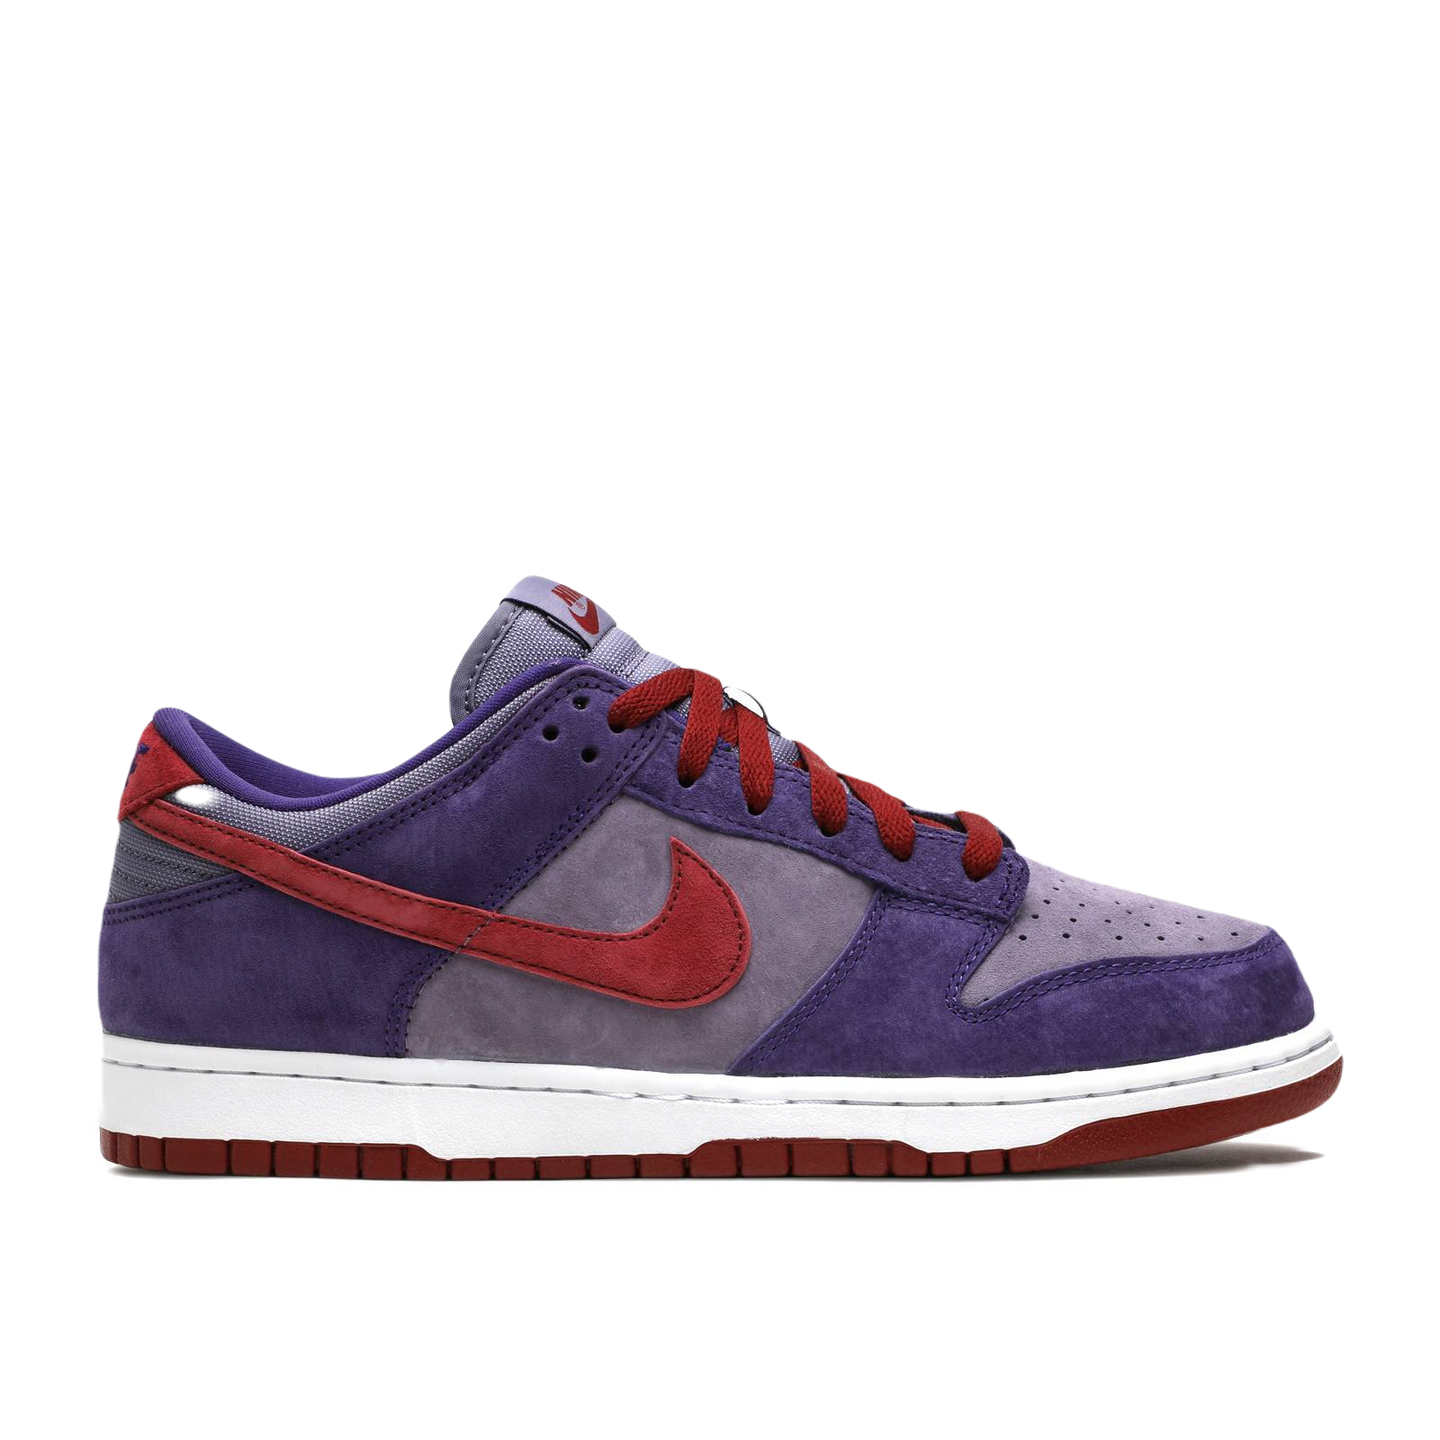 Nike Dunk Low SP - Plum - Used